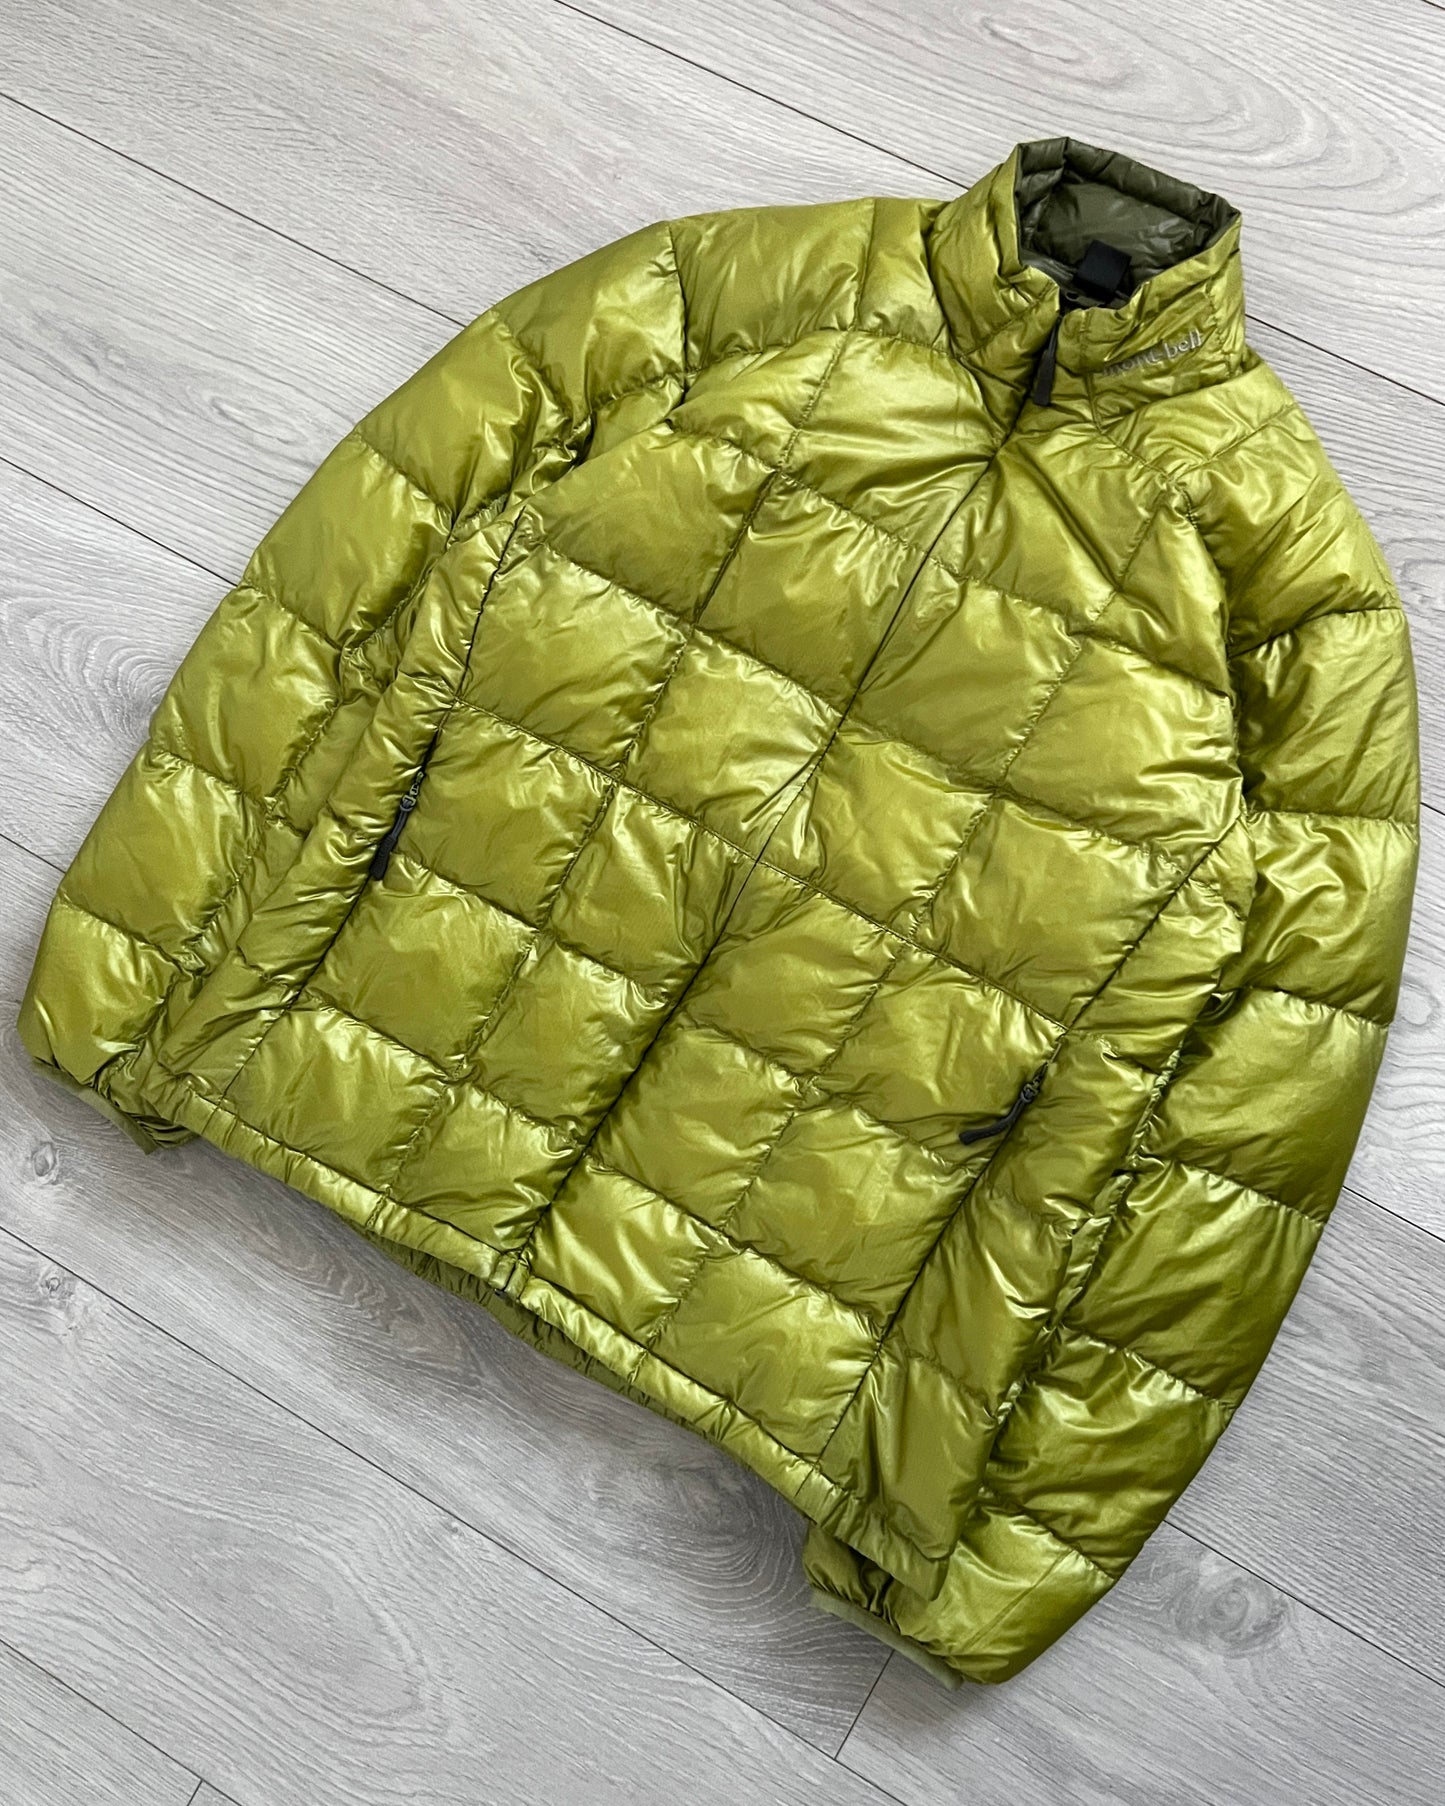 Montbell 00s Square Stitch Nylon Down Puffer Jacket - Size S